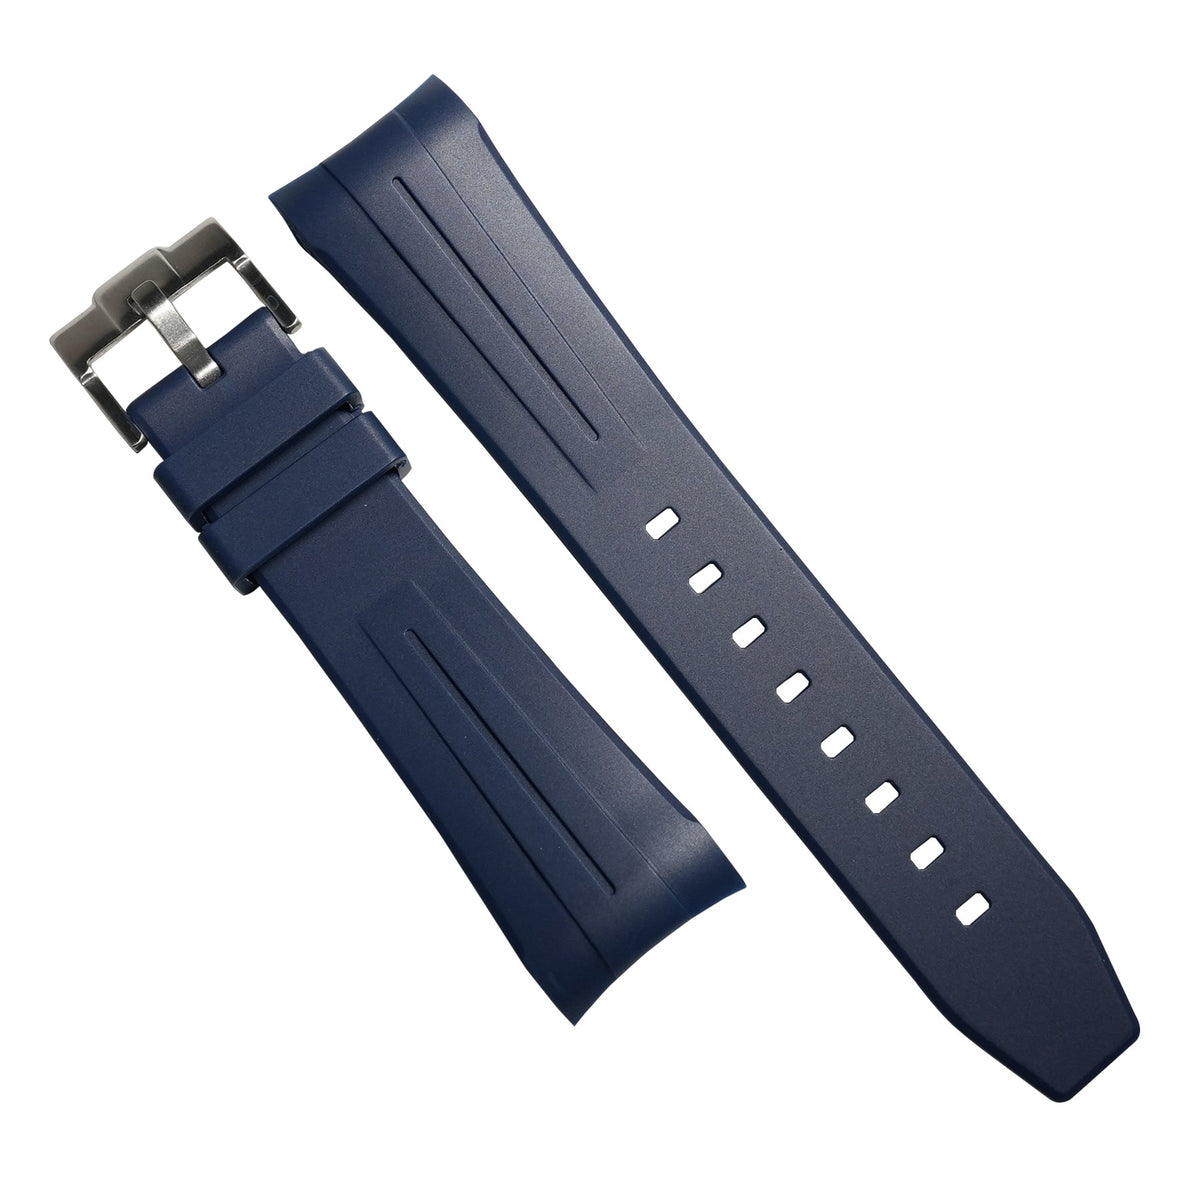 Curved End Rubber Strap for Blancpain x Swatch Scuba Fifty Fathoms in Navy - Nomad Watch Works SG